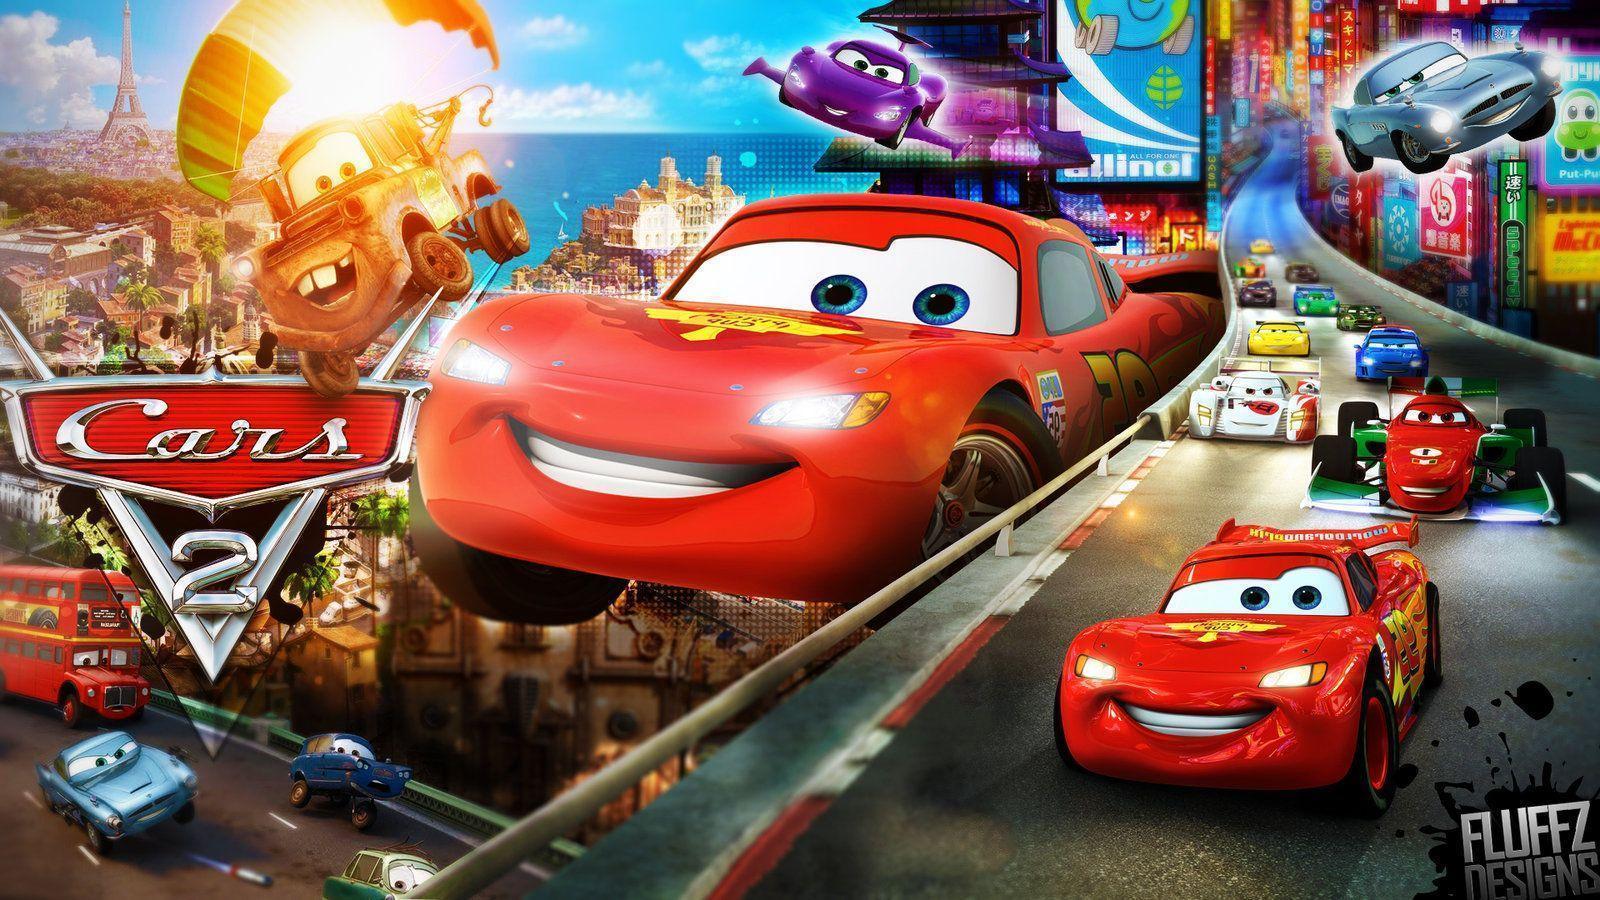 Collection of Disney Cars Wallpaper on HDWallpaper